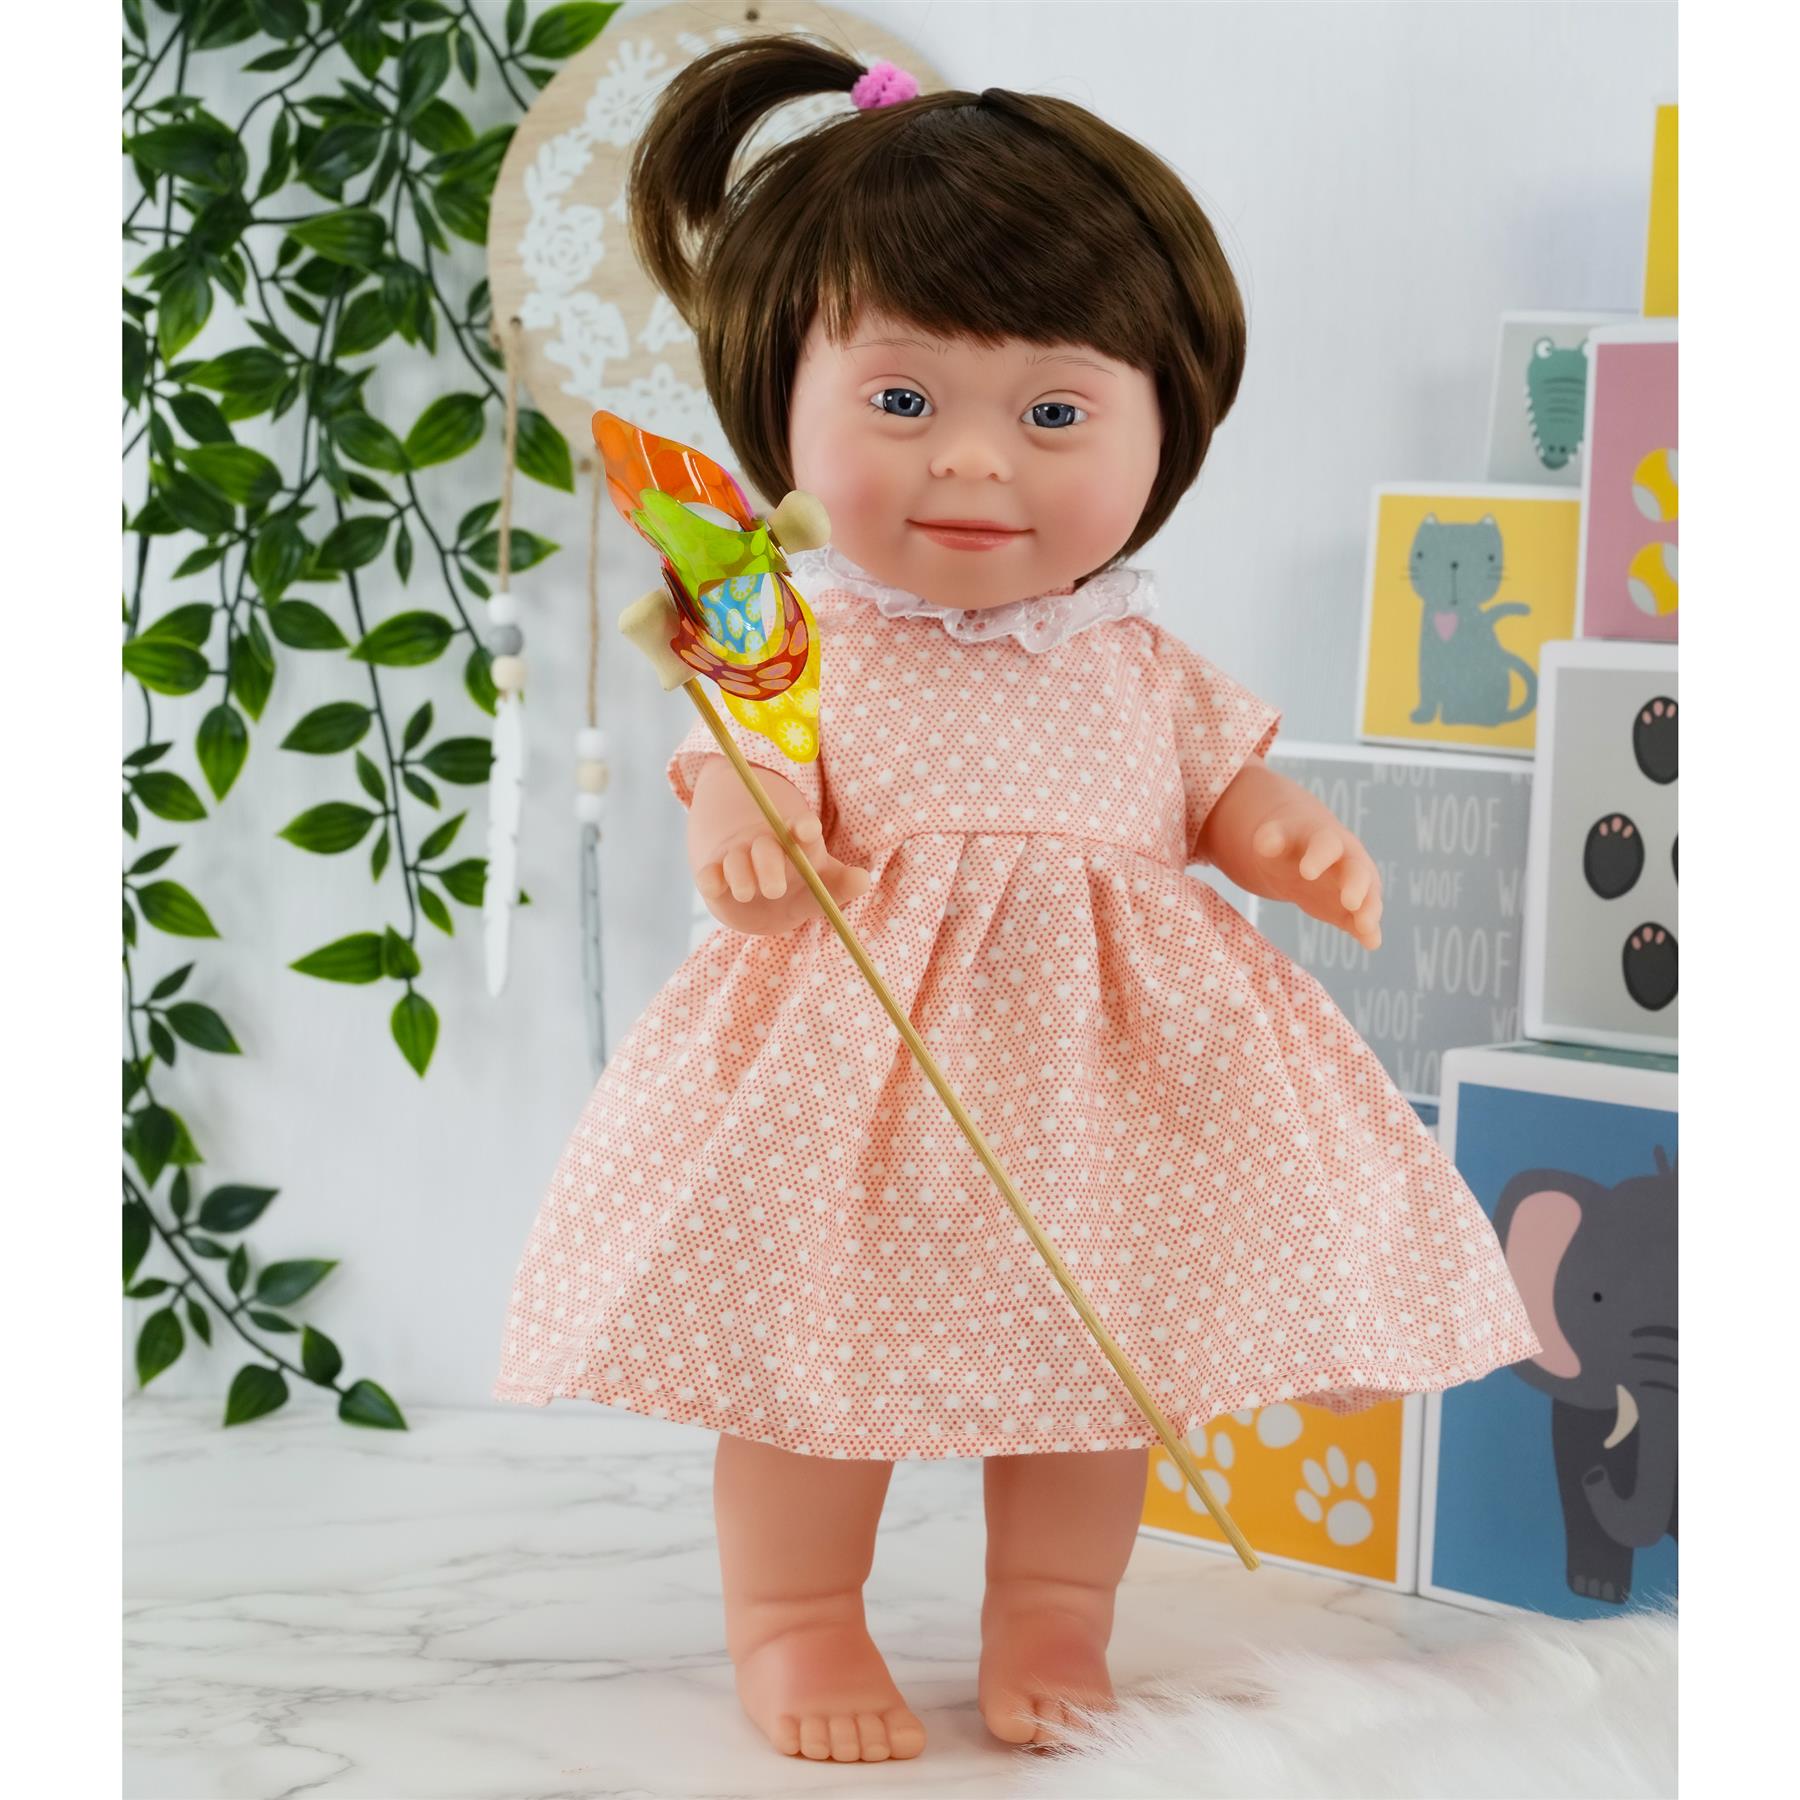 Brown Hair Girl Baby Doll with Down Syndrome by BiBi Doll - UKBuyZone